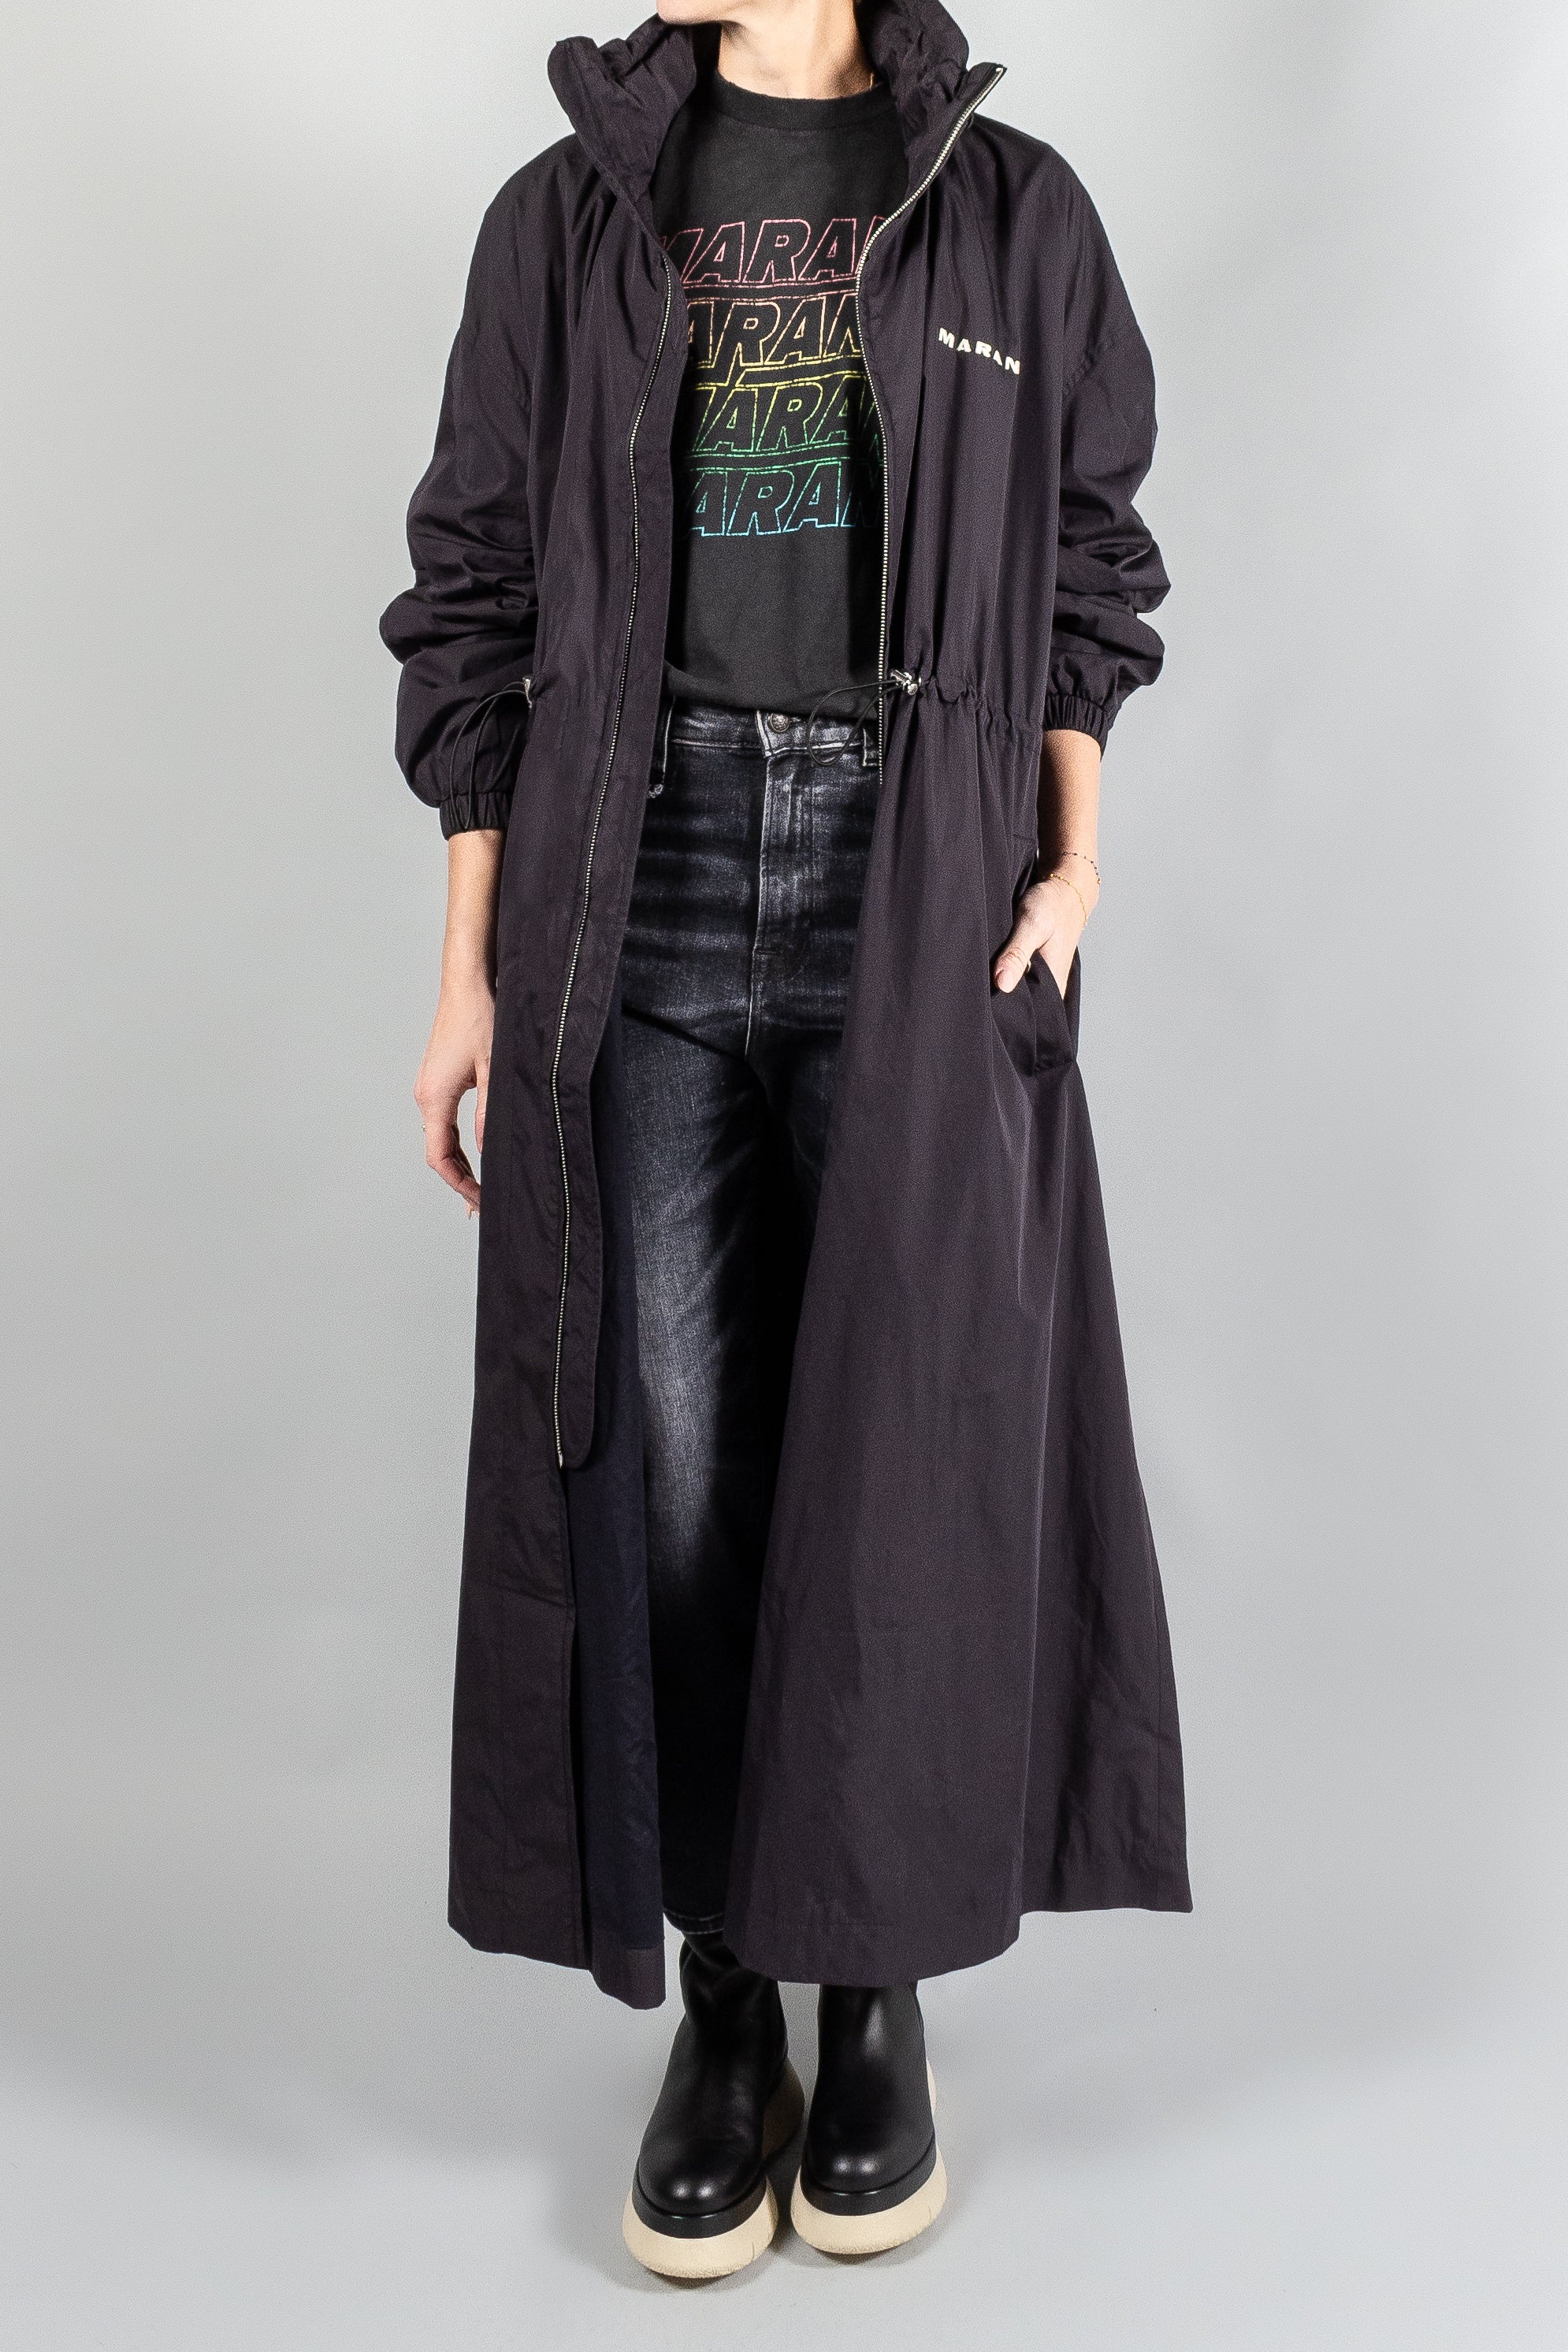 Isabel Marant Etoile Berthely Technical Trench